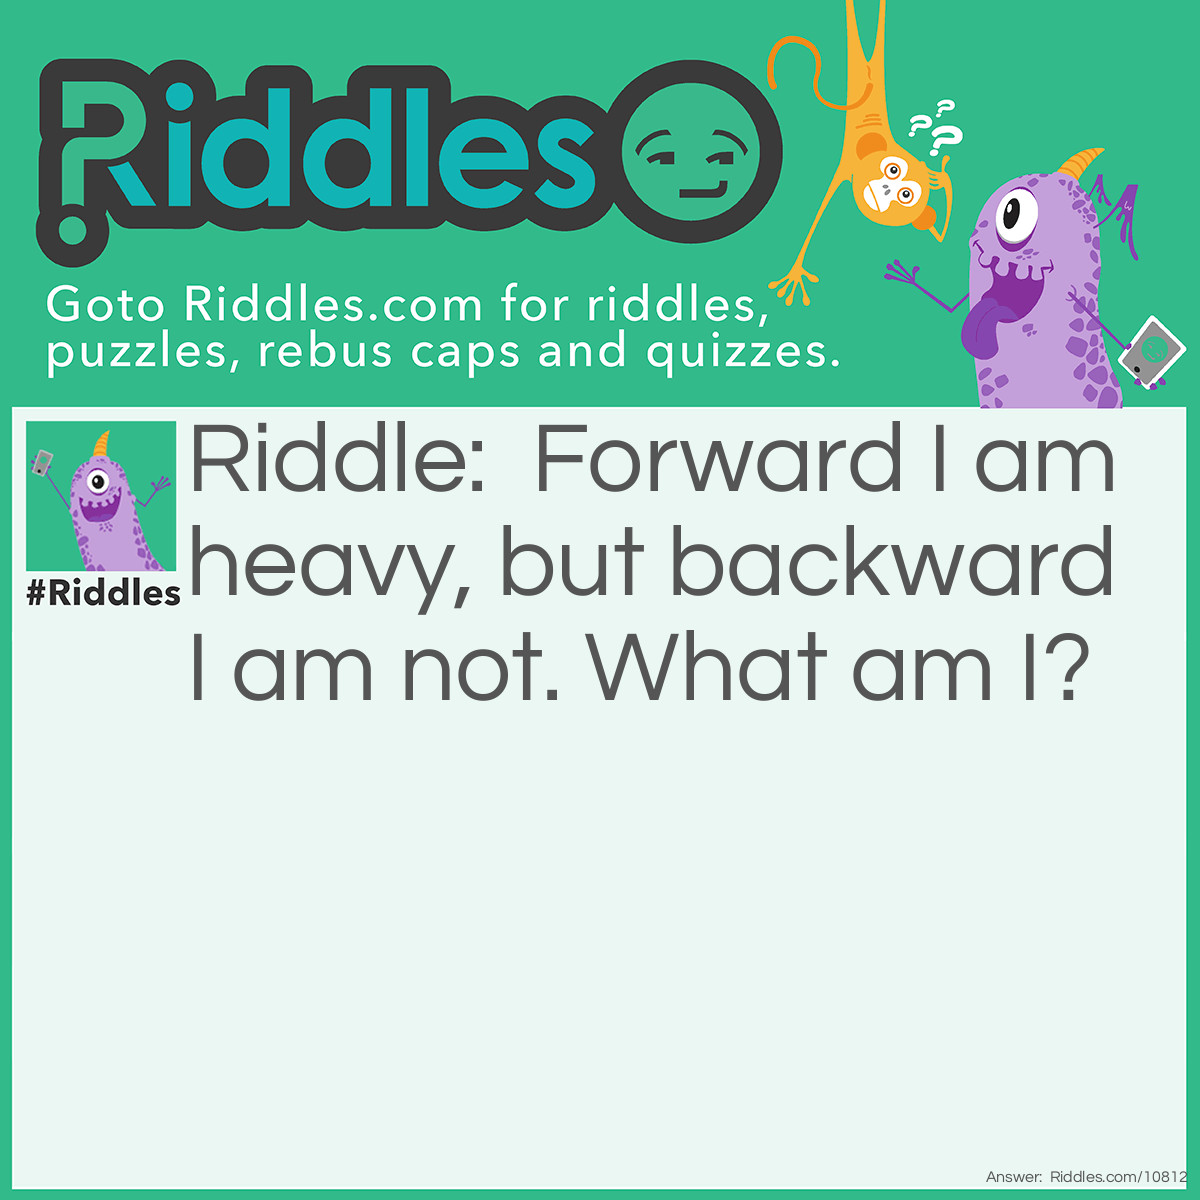 Riddle: Forward I am heavy, but backward I am not. What am I? Answer: Ton and not.